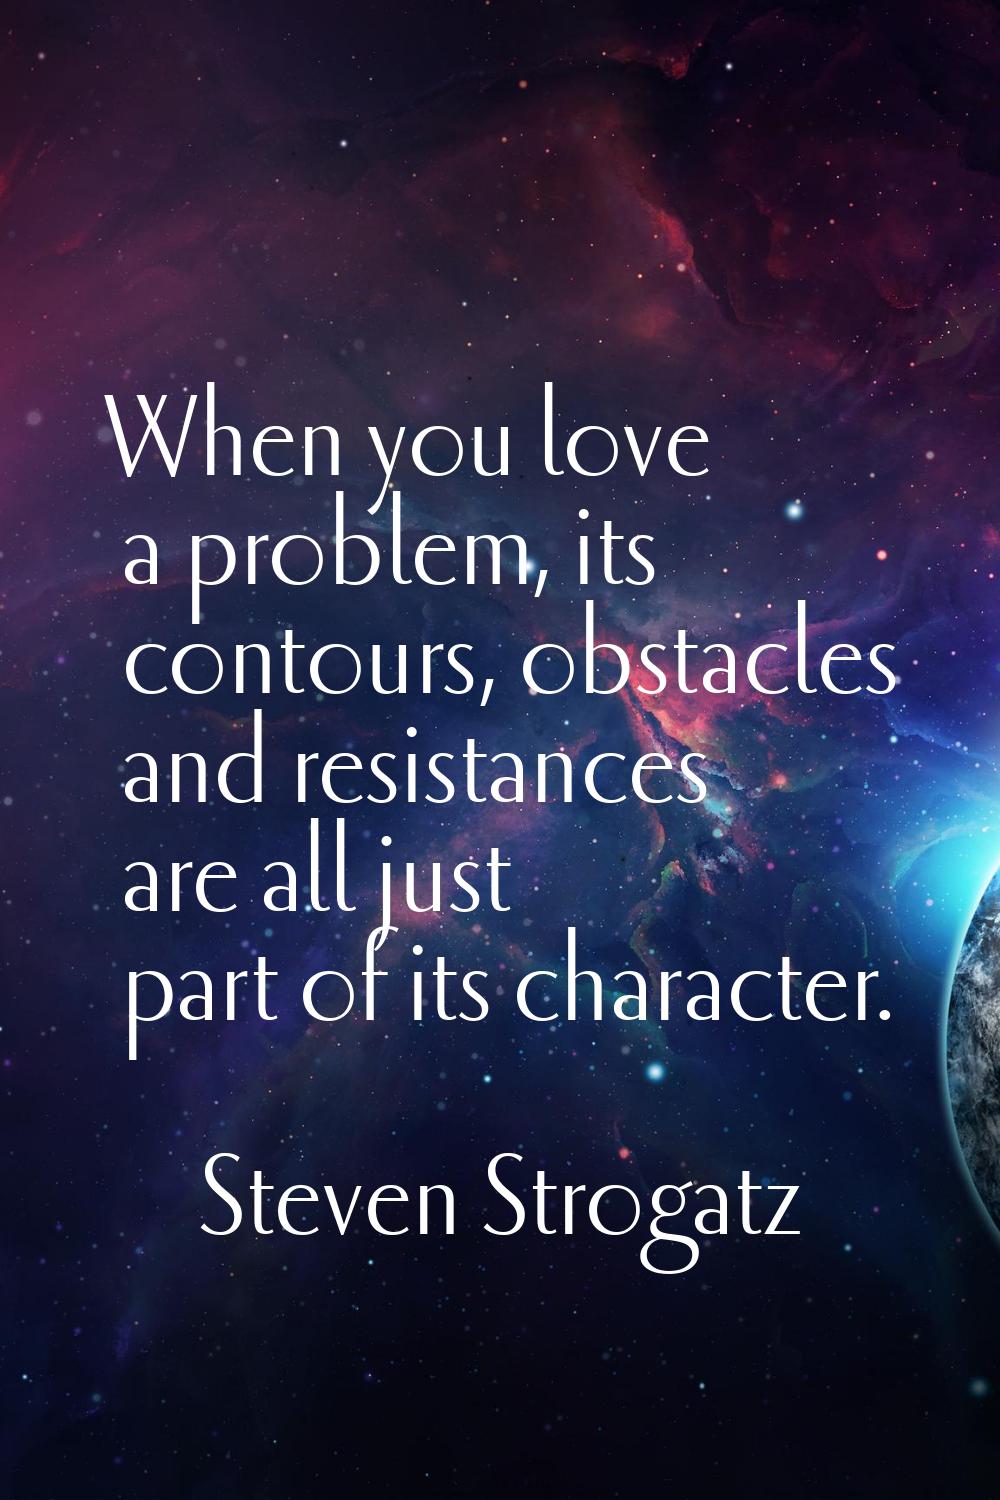 When you love a problem, its contours, obstacles and resistances are all just part of its character